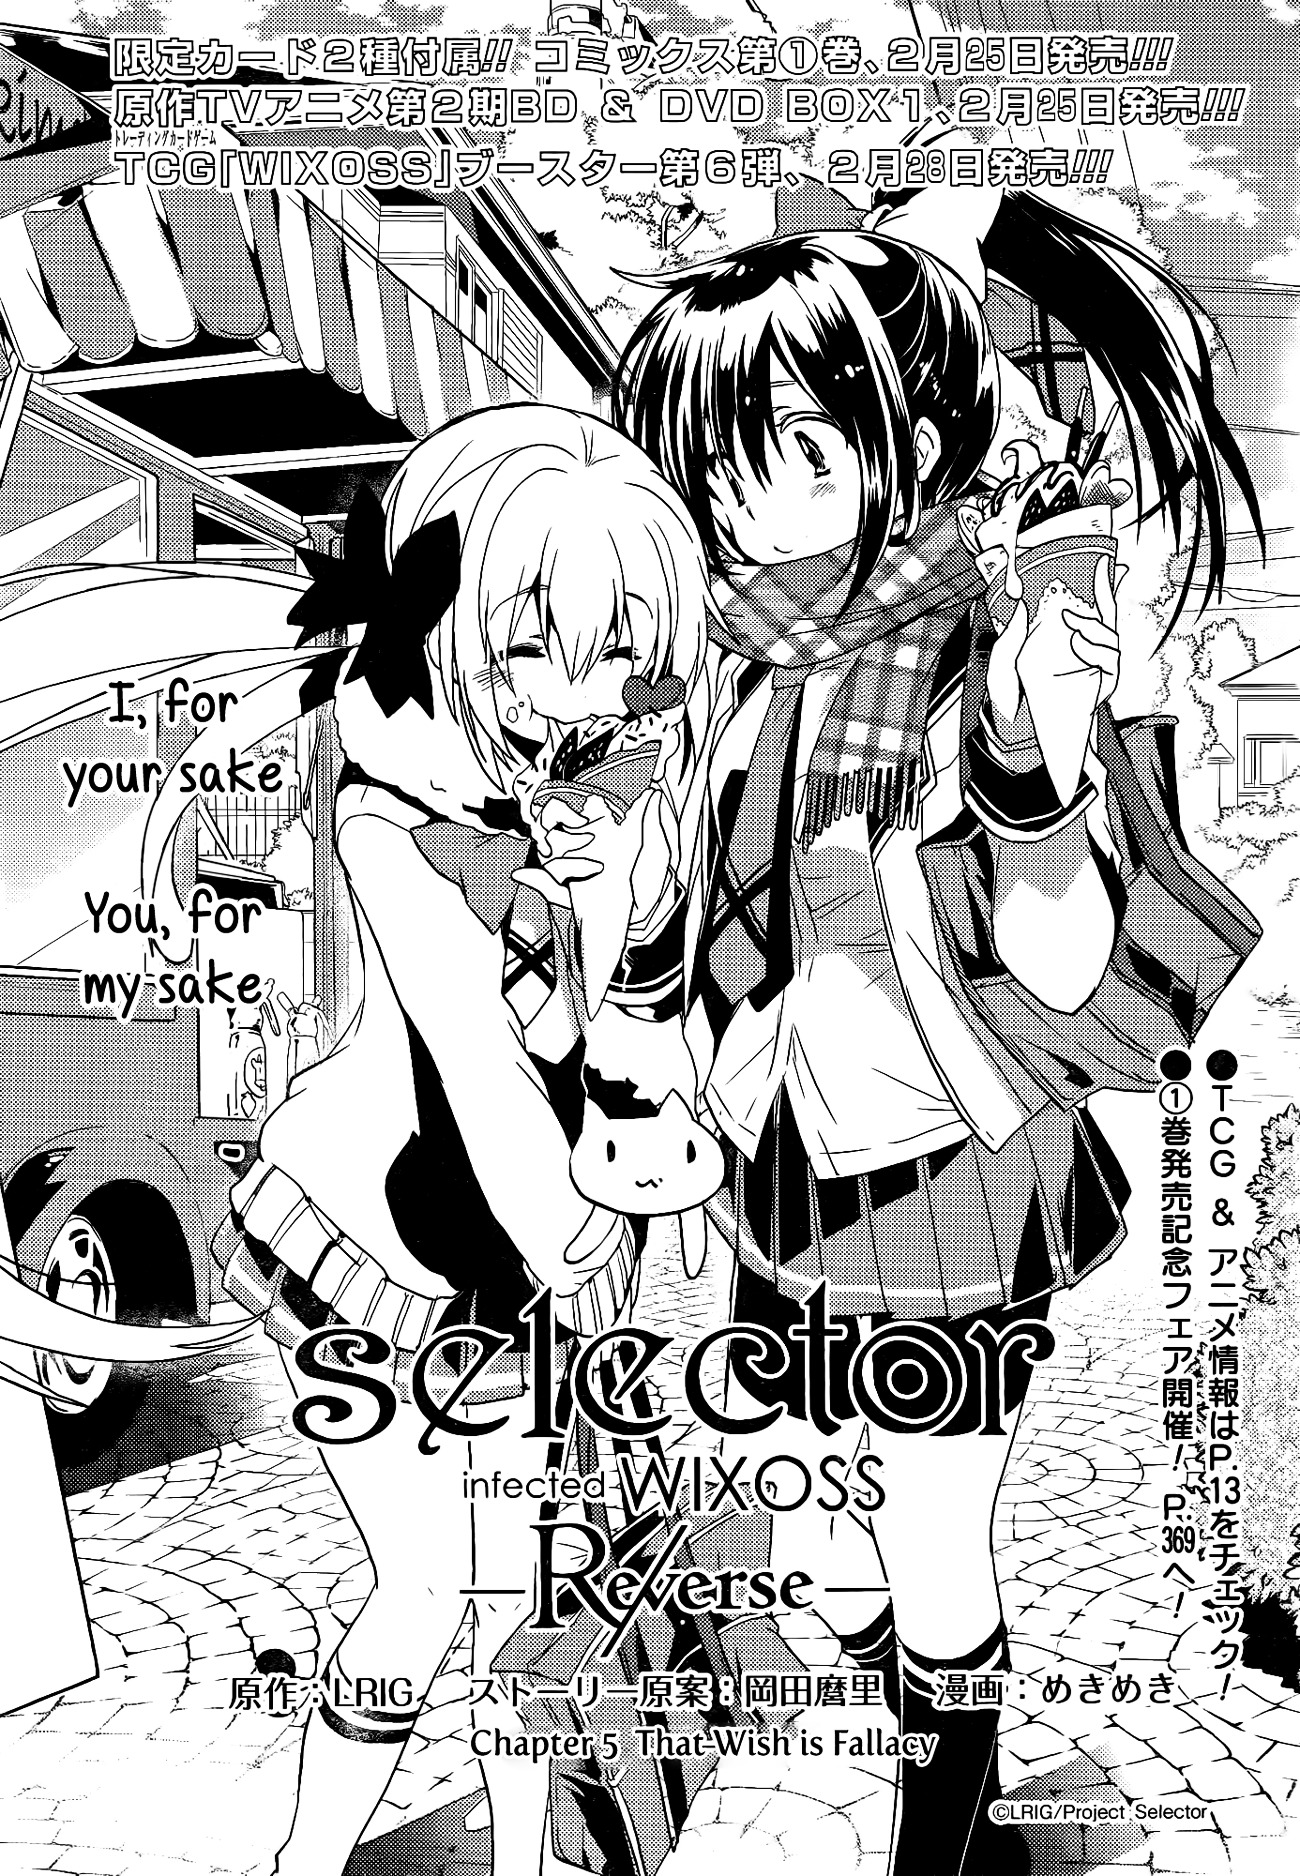 Selector Infected Wixoss - Re/verse - Chapter 5 #1